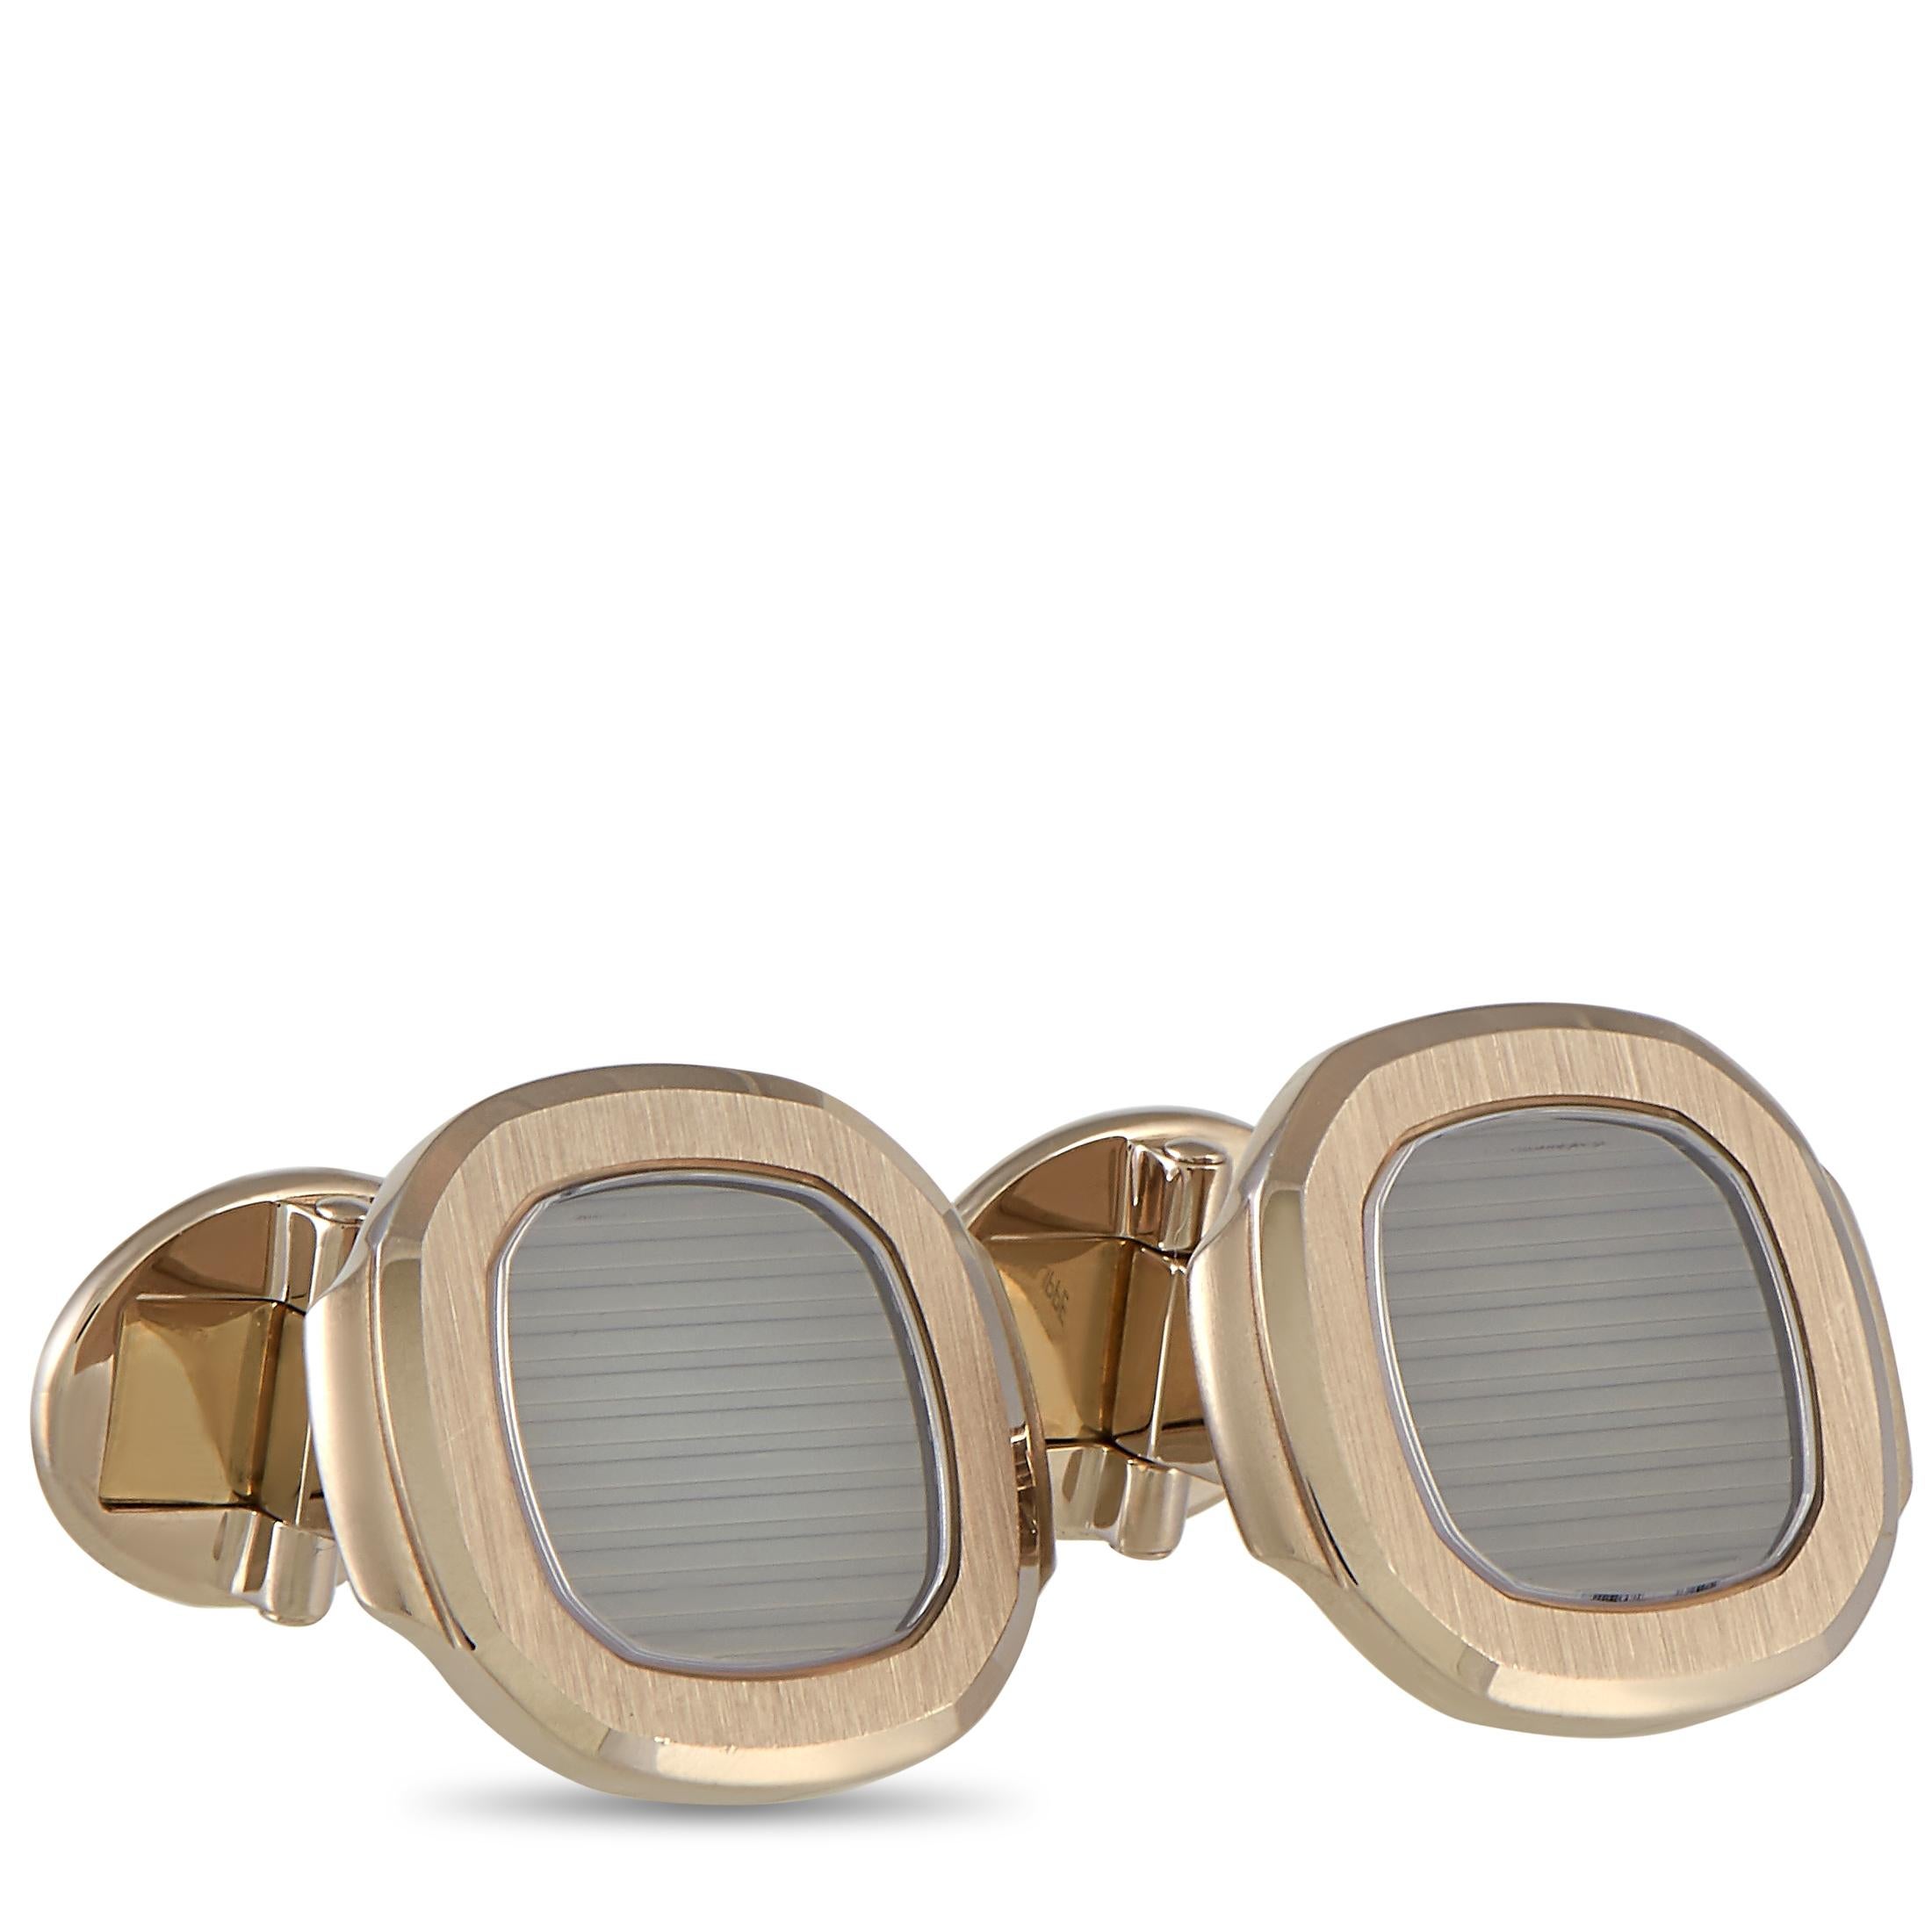 The Patek Philippe “Nautilus” cufflinks are made of 18K yellow gold and each weighs 11.4 grams, measuring 0.70” by 0.70”.

The pair is offered in brand new condition and includes the manufacturer’s box.